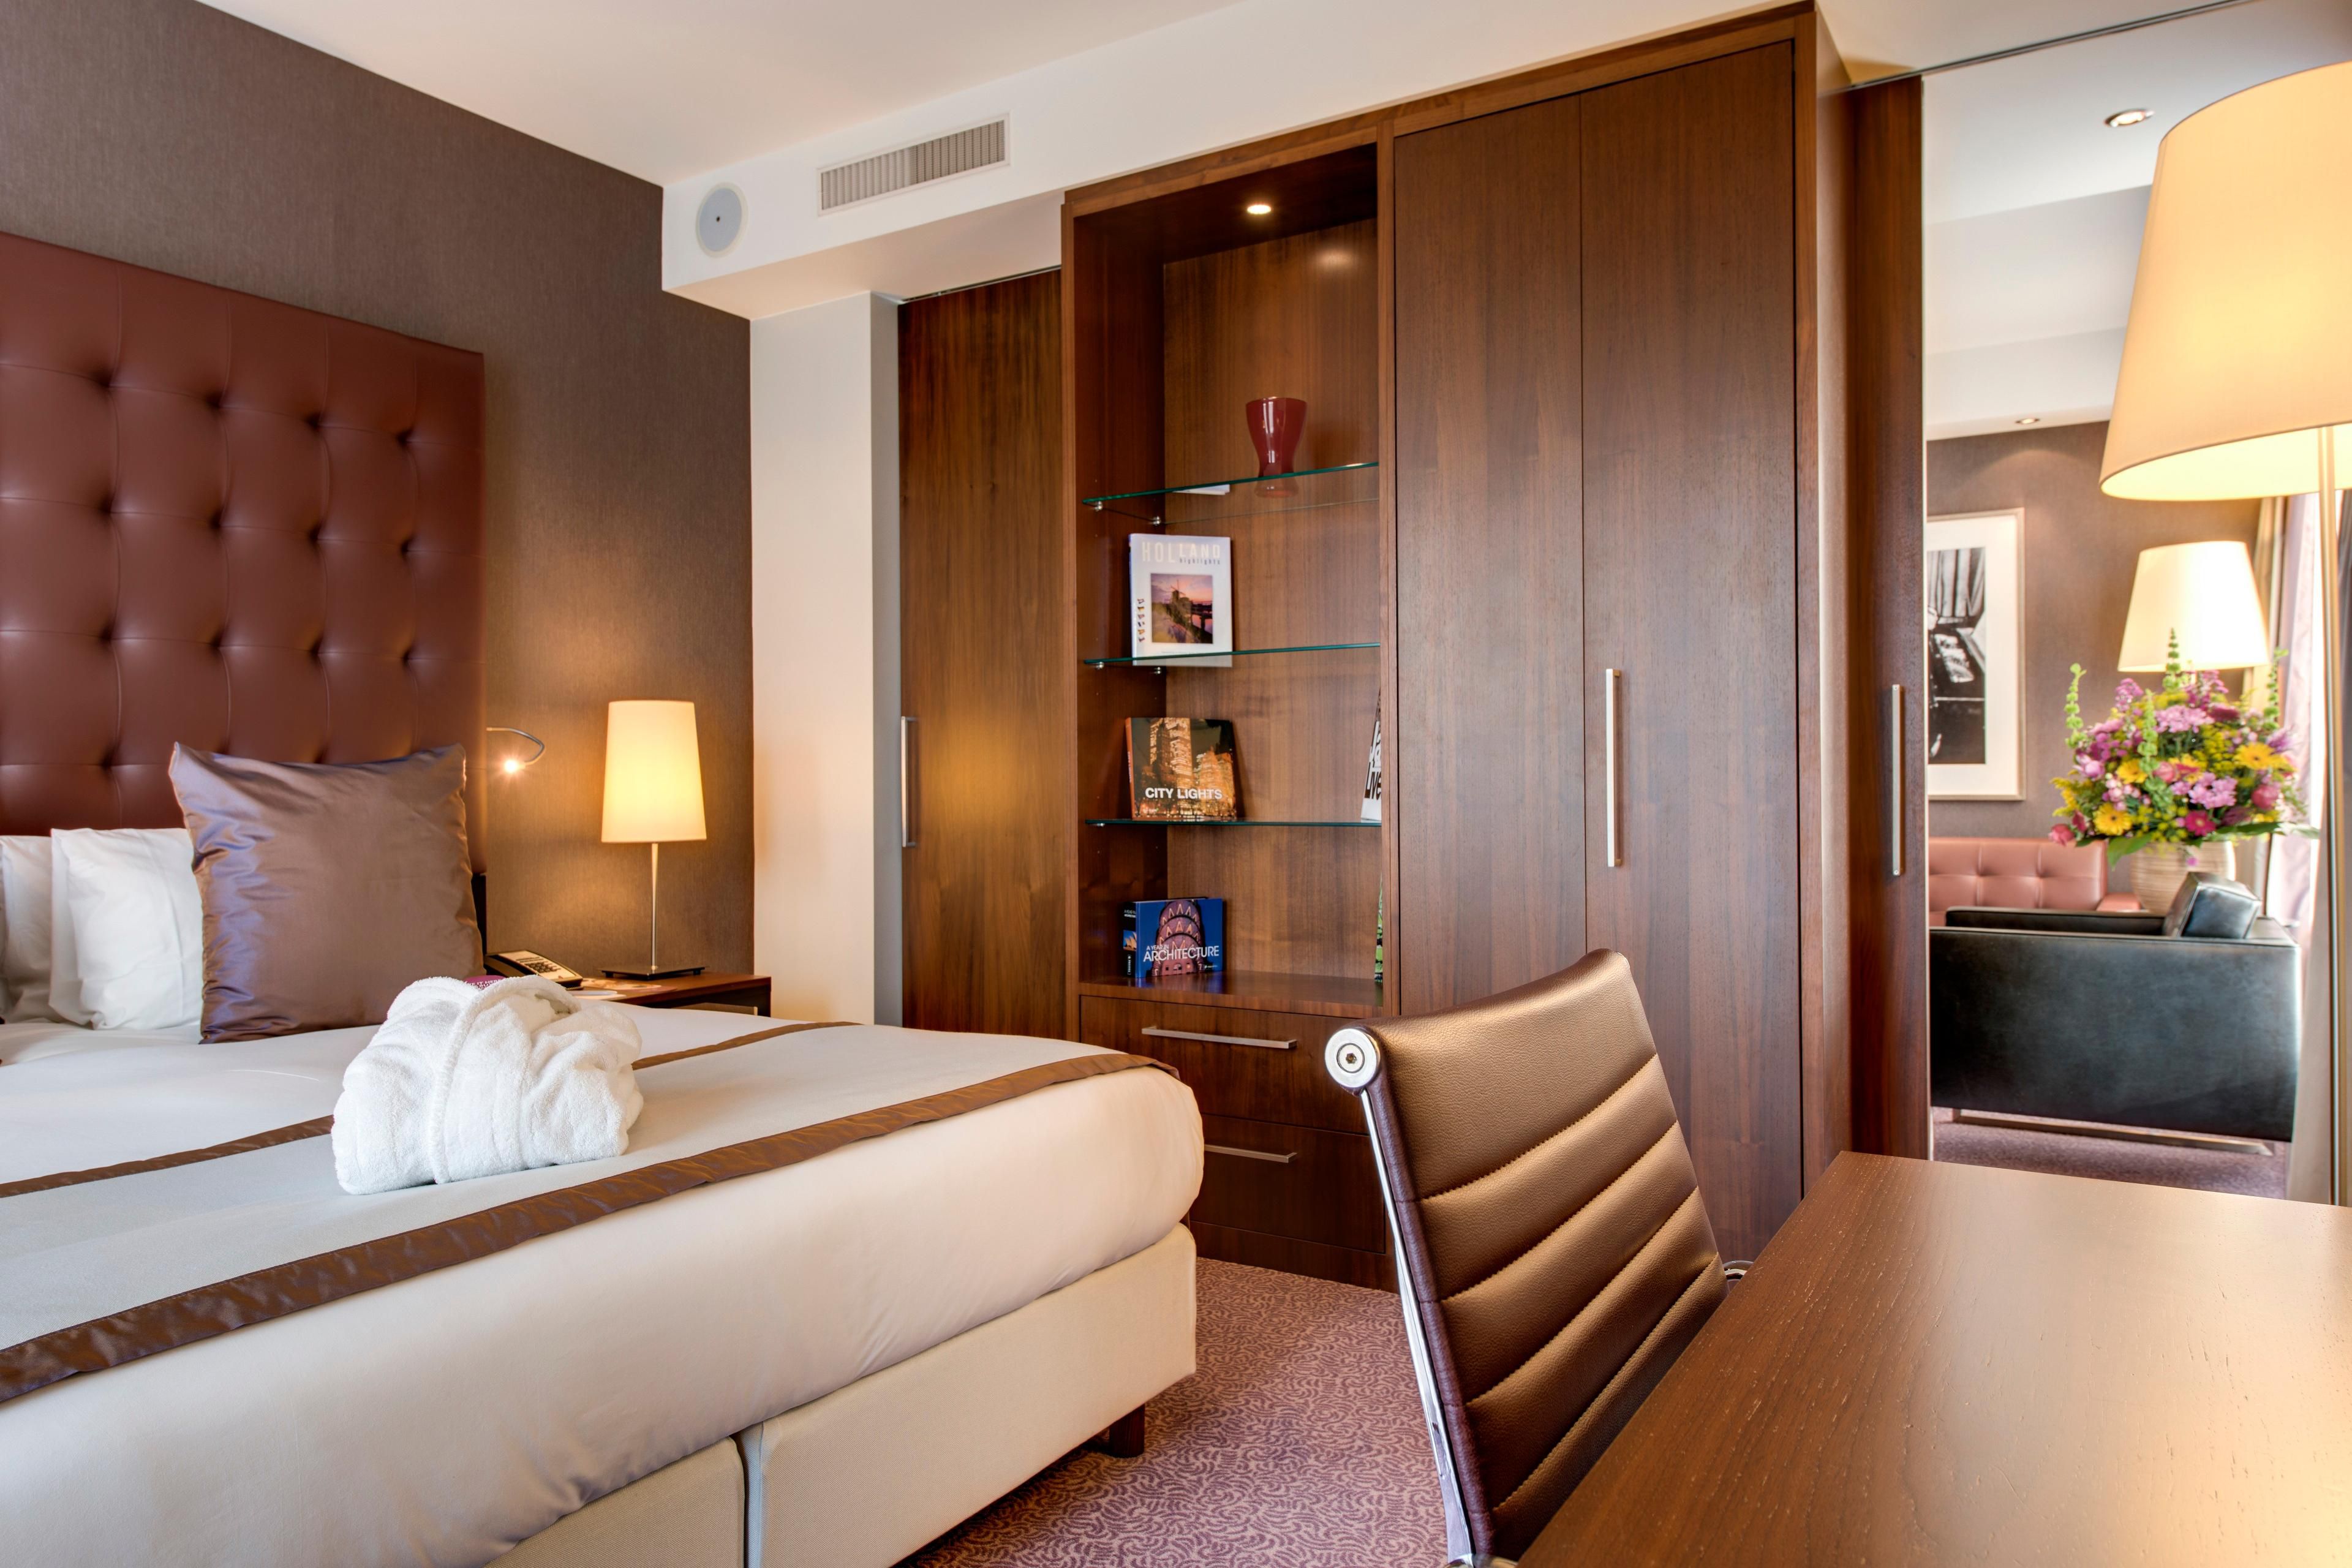 A beautiful Junior Suite at the Crowne Plaza hotel Amsterdam South